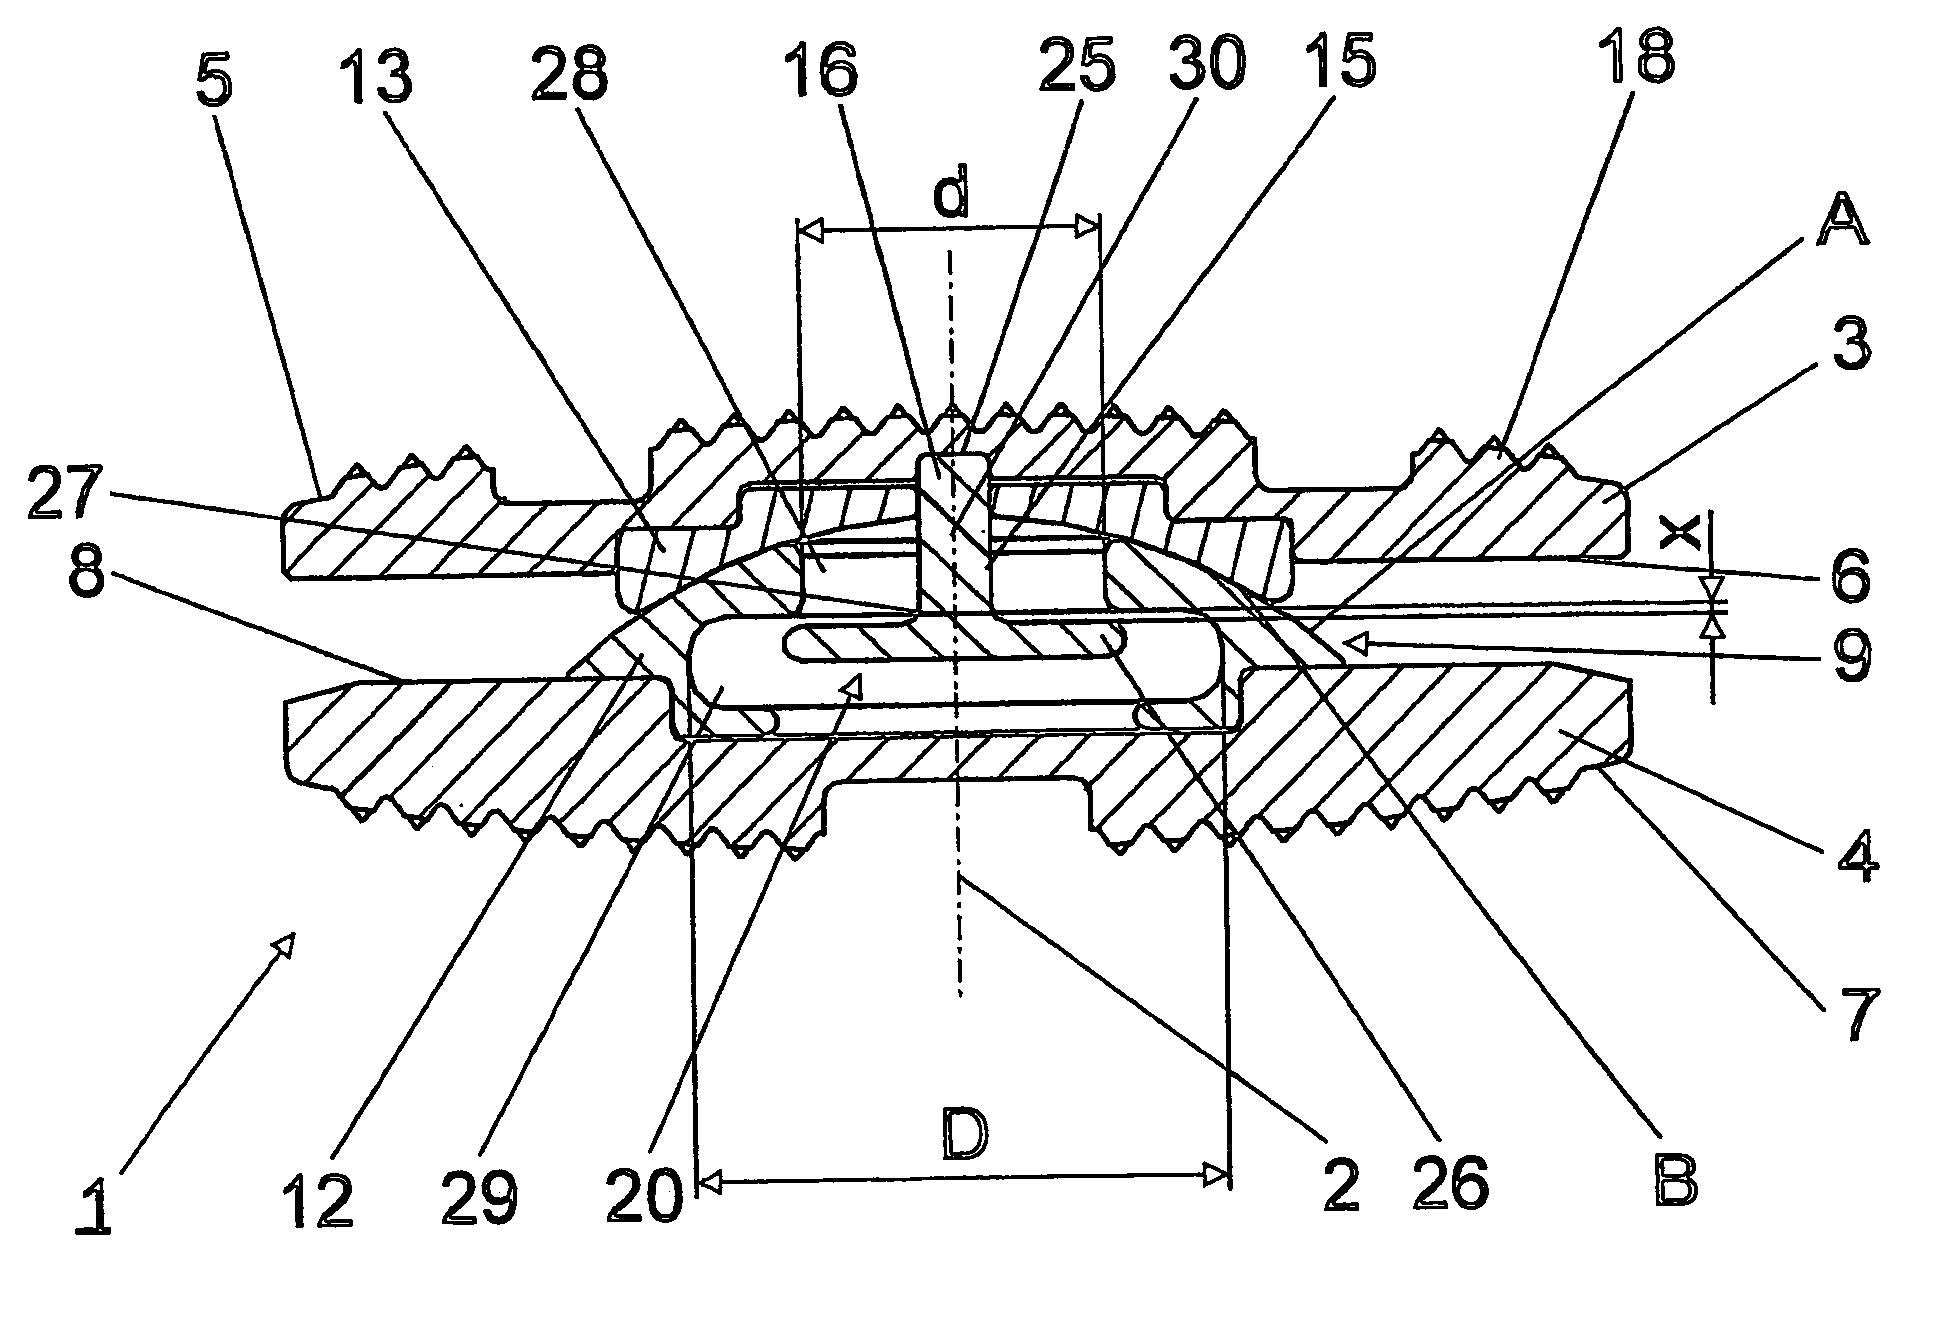 Intervertebral implant comprising dome-shaped joint surfaces